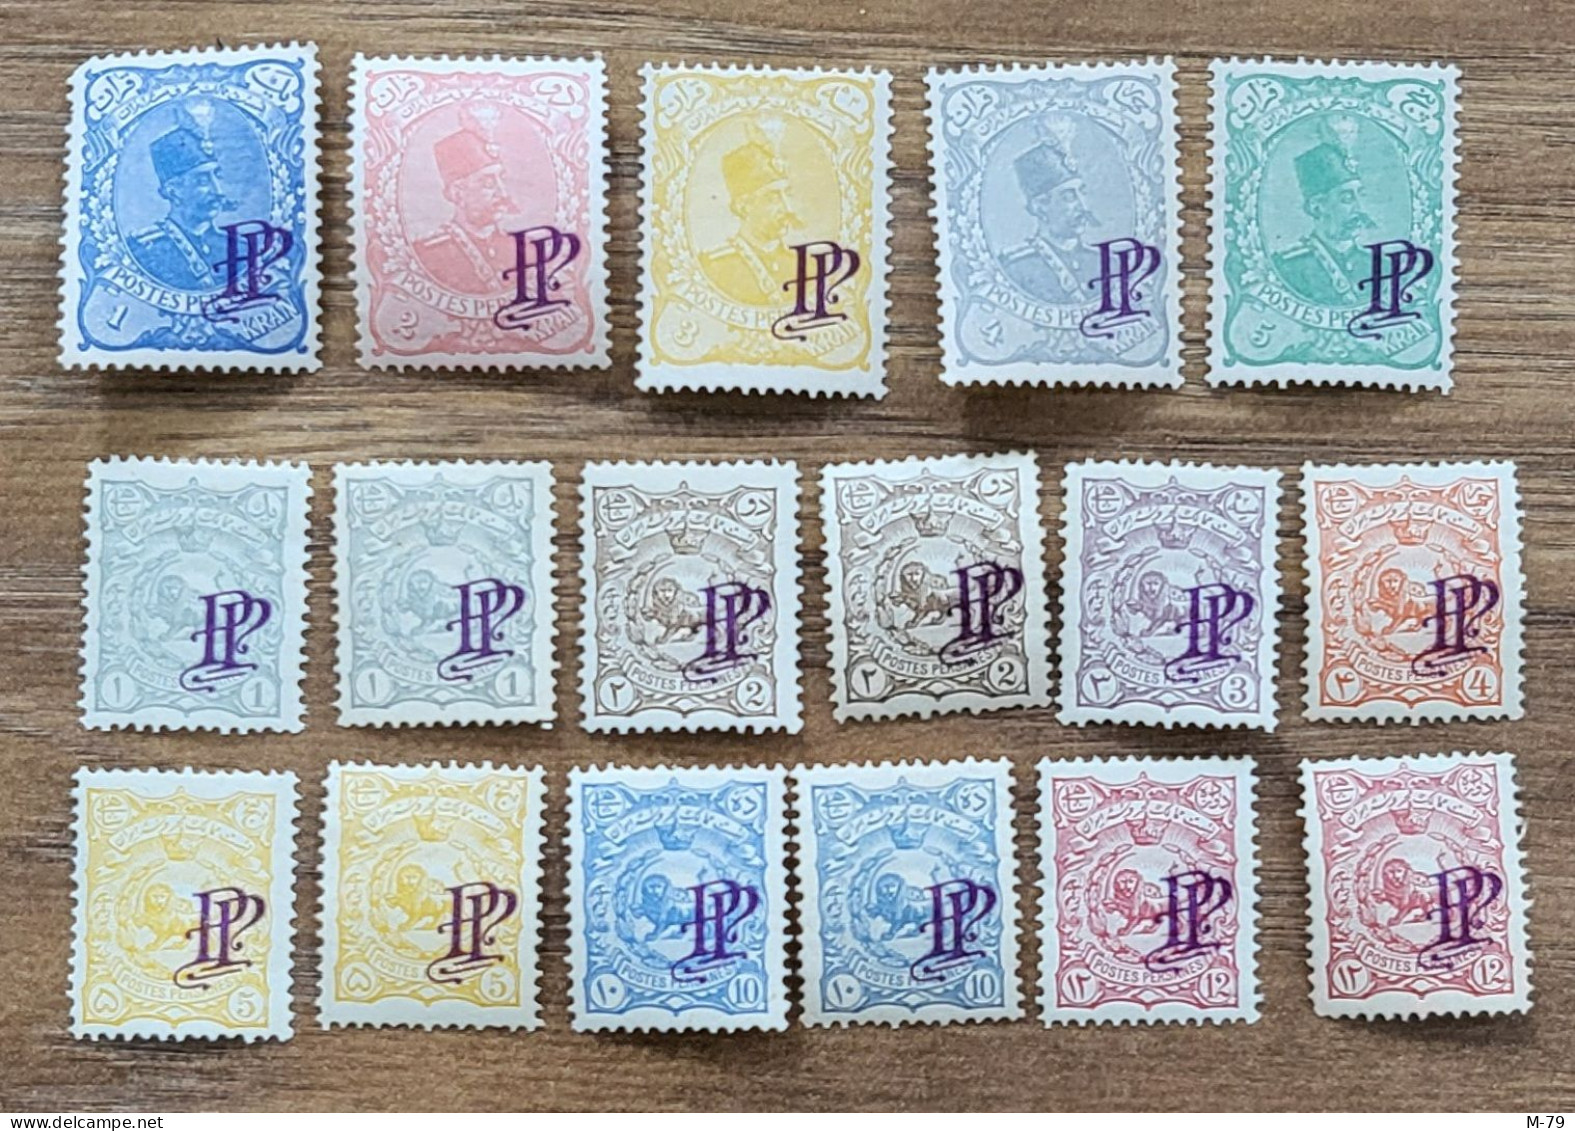 Iran/Persia - Qajar Mix Stamps Collection - Singles - Blocks - Surcharge - MNH - MH - OG -  A Few No GUM - Iran